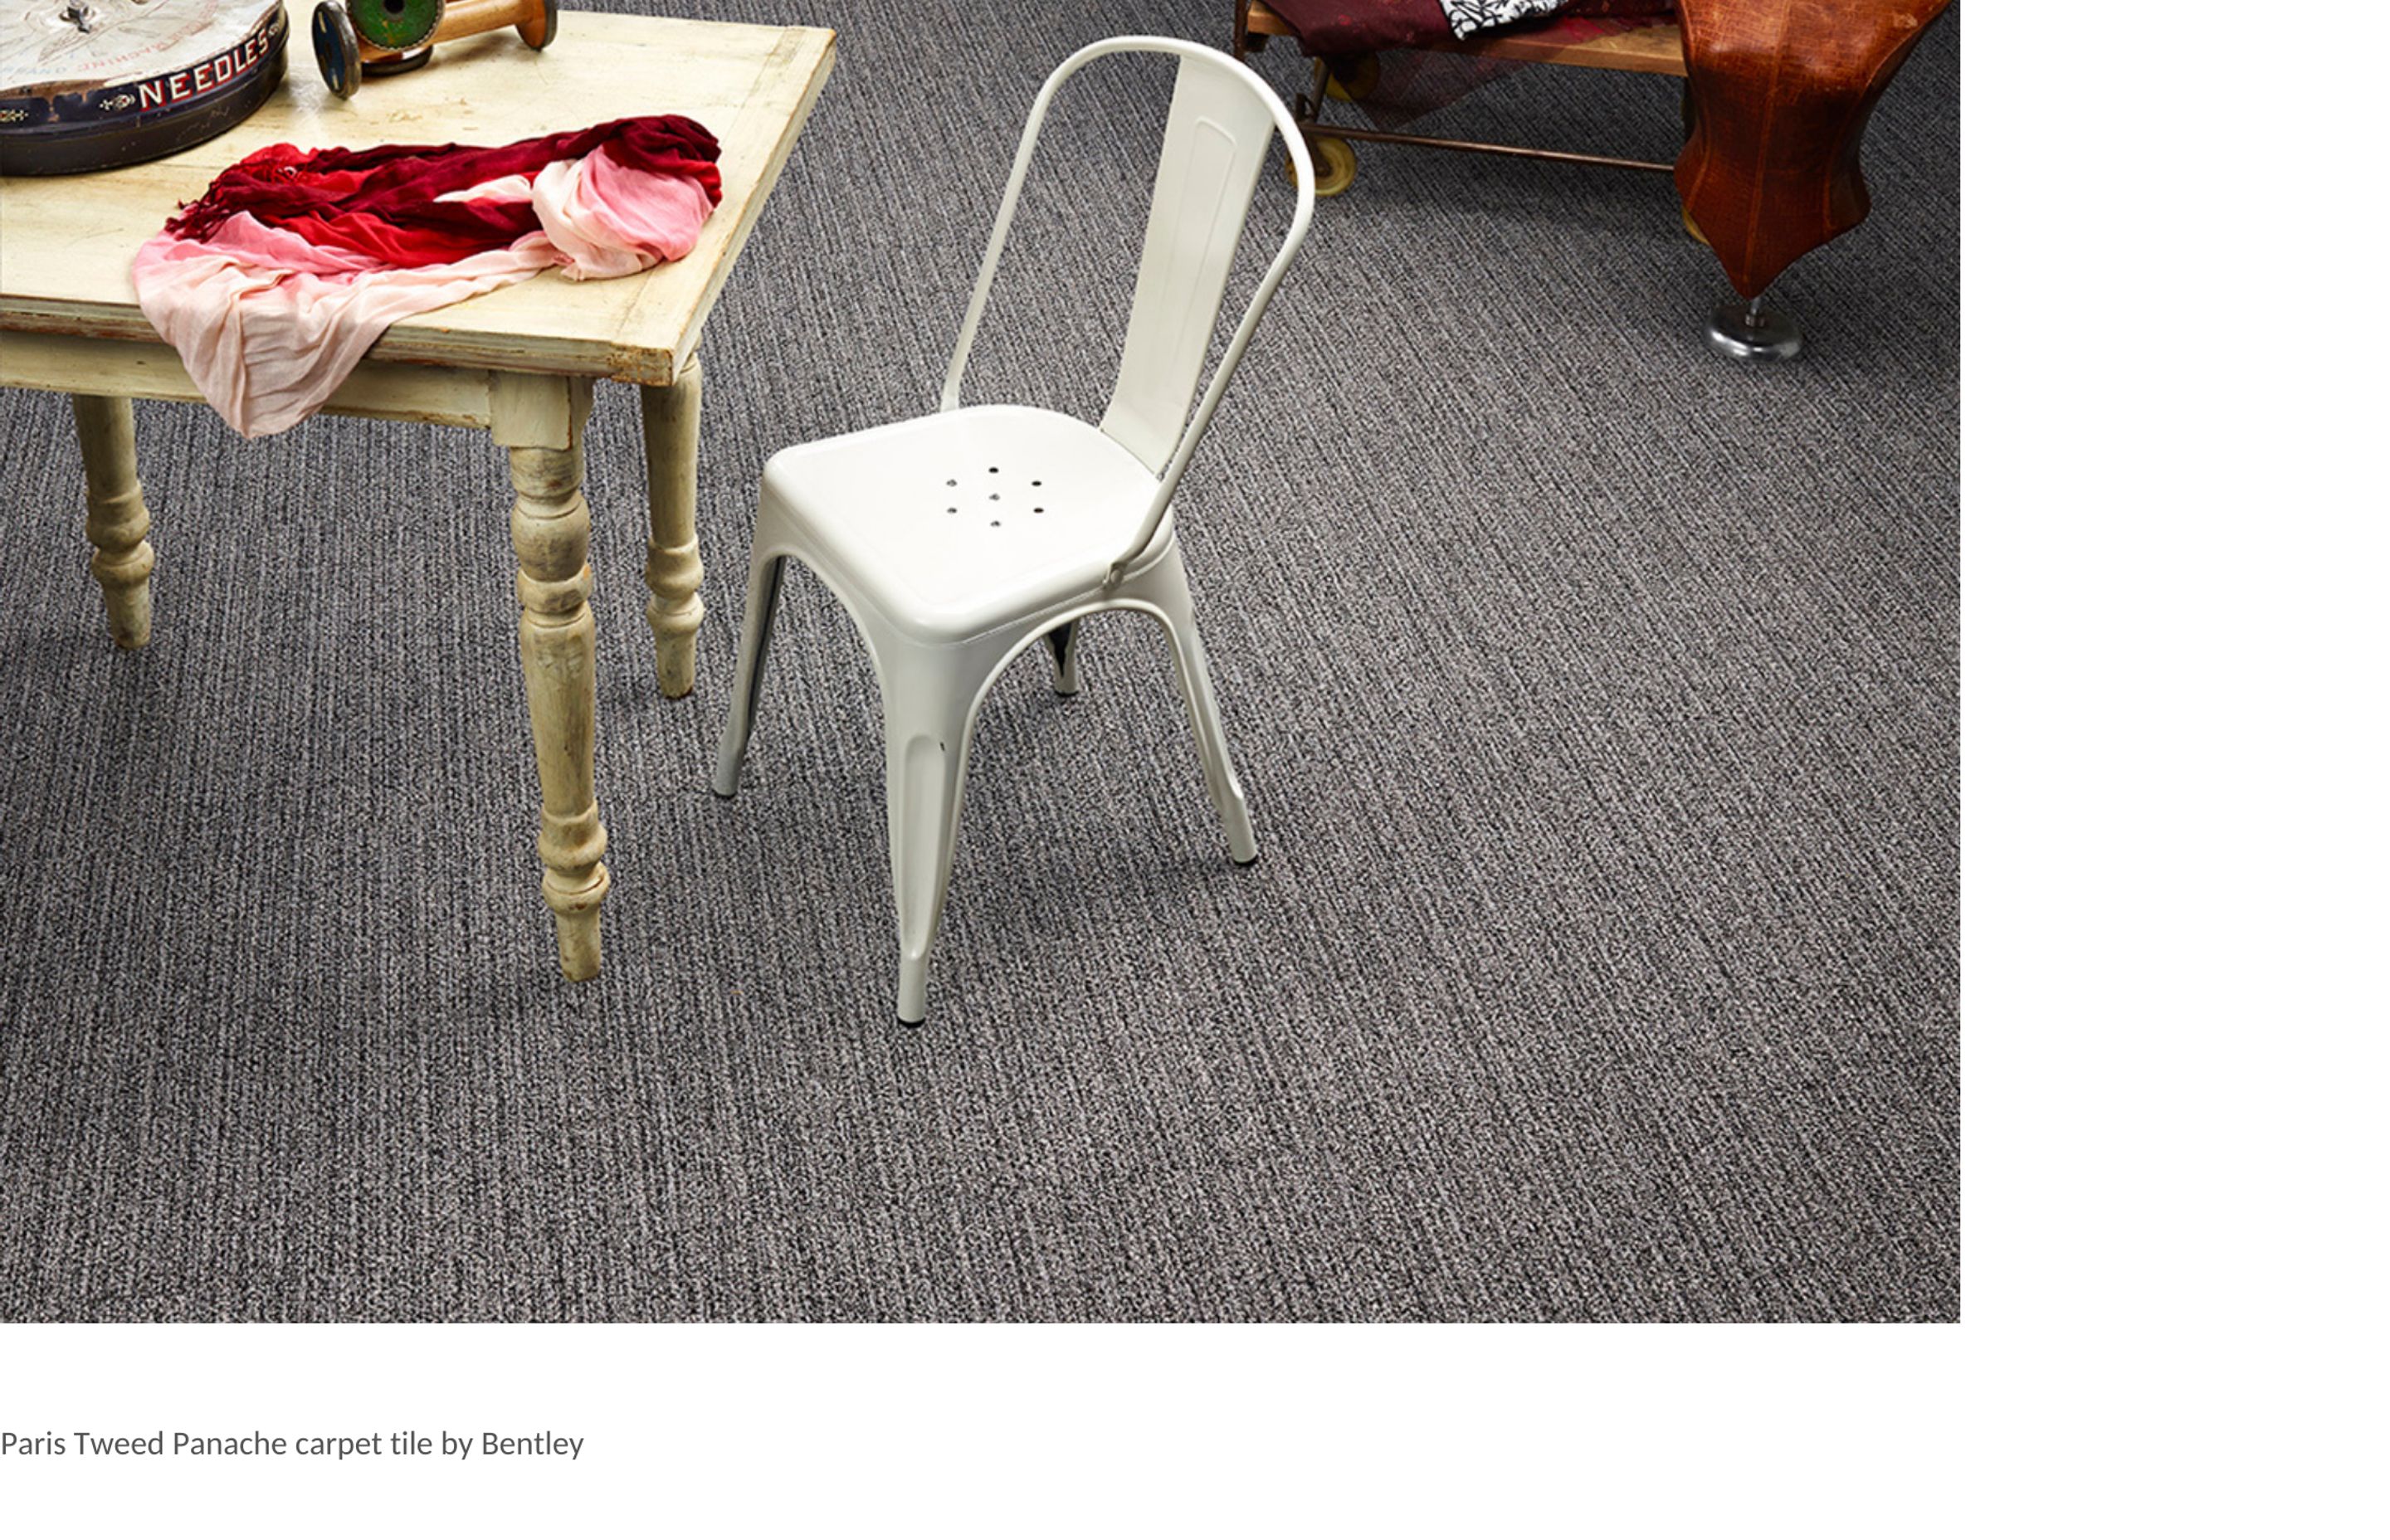 Carpets for Multi-Resi and Hotel: luxury, beauty and resilience meet sustainability at Heritage Carpets.